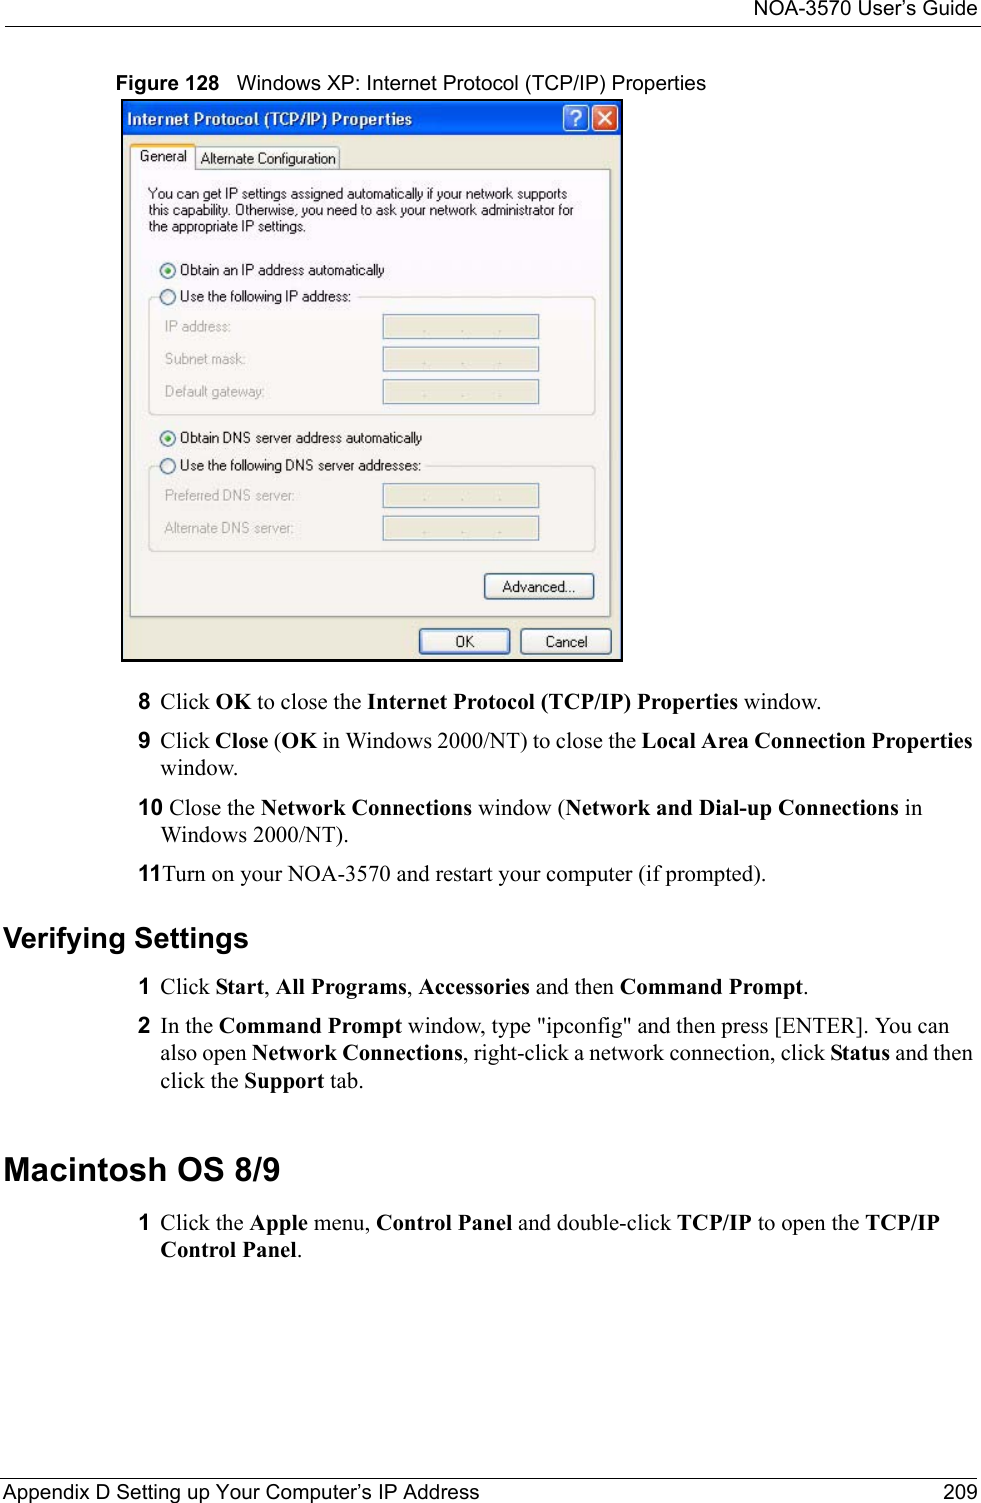 NOA-3570 User’s GuideAppendix D Setting up Your Computer’s IP Address 209Figure 128   Windows XP: Internet Protocol (TCP/IP) Properties8Click OK to close the Internet Protocol (TCP/IP) Properties window.9Click Close (OK in Windows 2000/NT) to close the Local Area Connection Properties window.10 Close the Network Connections window (Network and Dial-up Connections in Windows 2000/NT).11Turn on your NOA-3570 and restart your computer (if prompted).Verifying Settings1Click Start, All Programs, Accessories and then Command Prompt.2In the Command Prompt window, type &quot;ipconfig&quot; and then press [ENTER]. You can also open Network Connections, right-click a network connection, click Status and then click the Support tab.Macintosh OS 8/9 1Click the Apple menu, Control Panel and double-click TCP/IP to open the TCP/IP Control Panel.